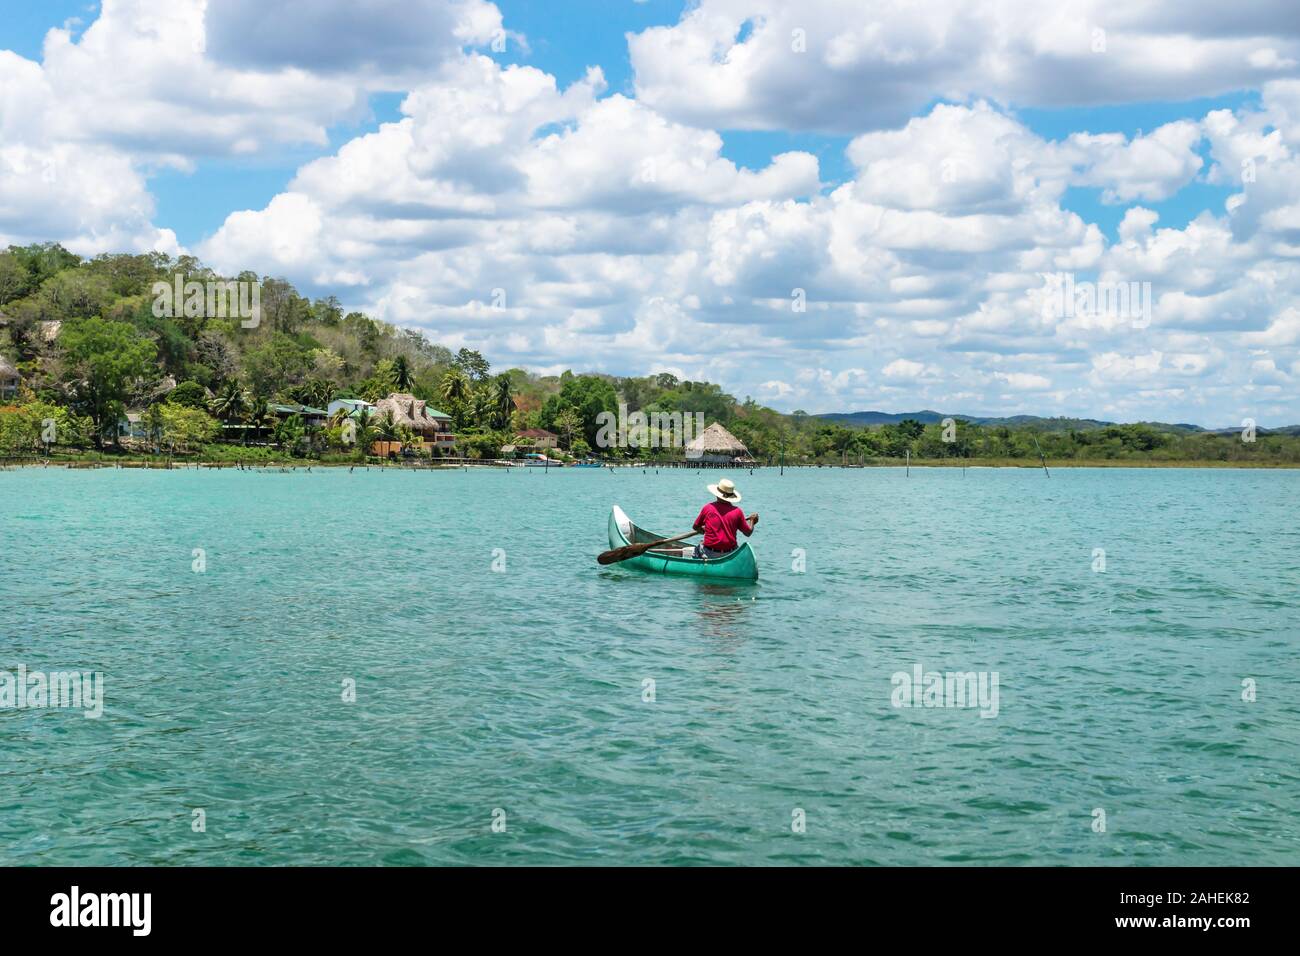 El Remate, Peten, Guatemala - 29 May 2019: Fisherman in canoe boat in turquoise colored lake Itza rowing towards village with sunny cloud sky Stock Photo